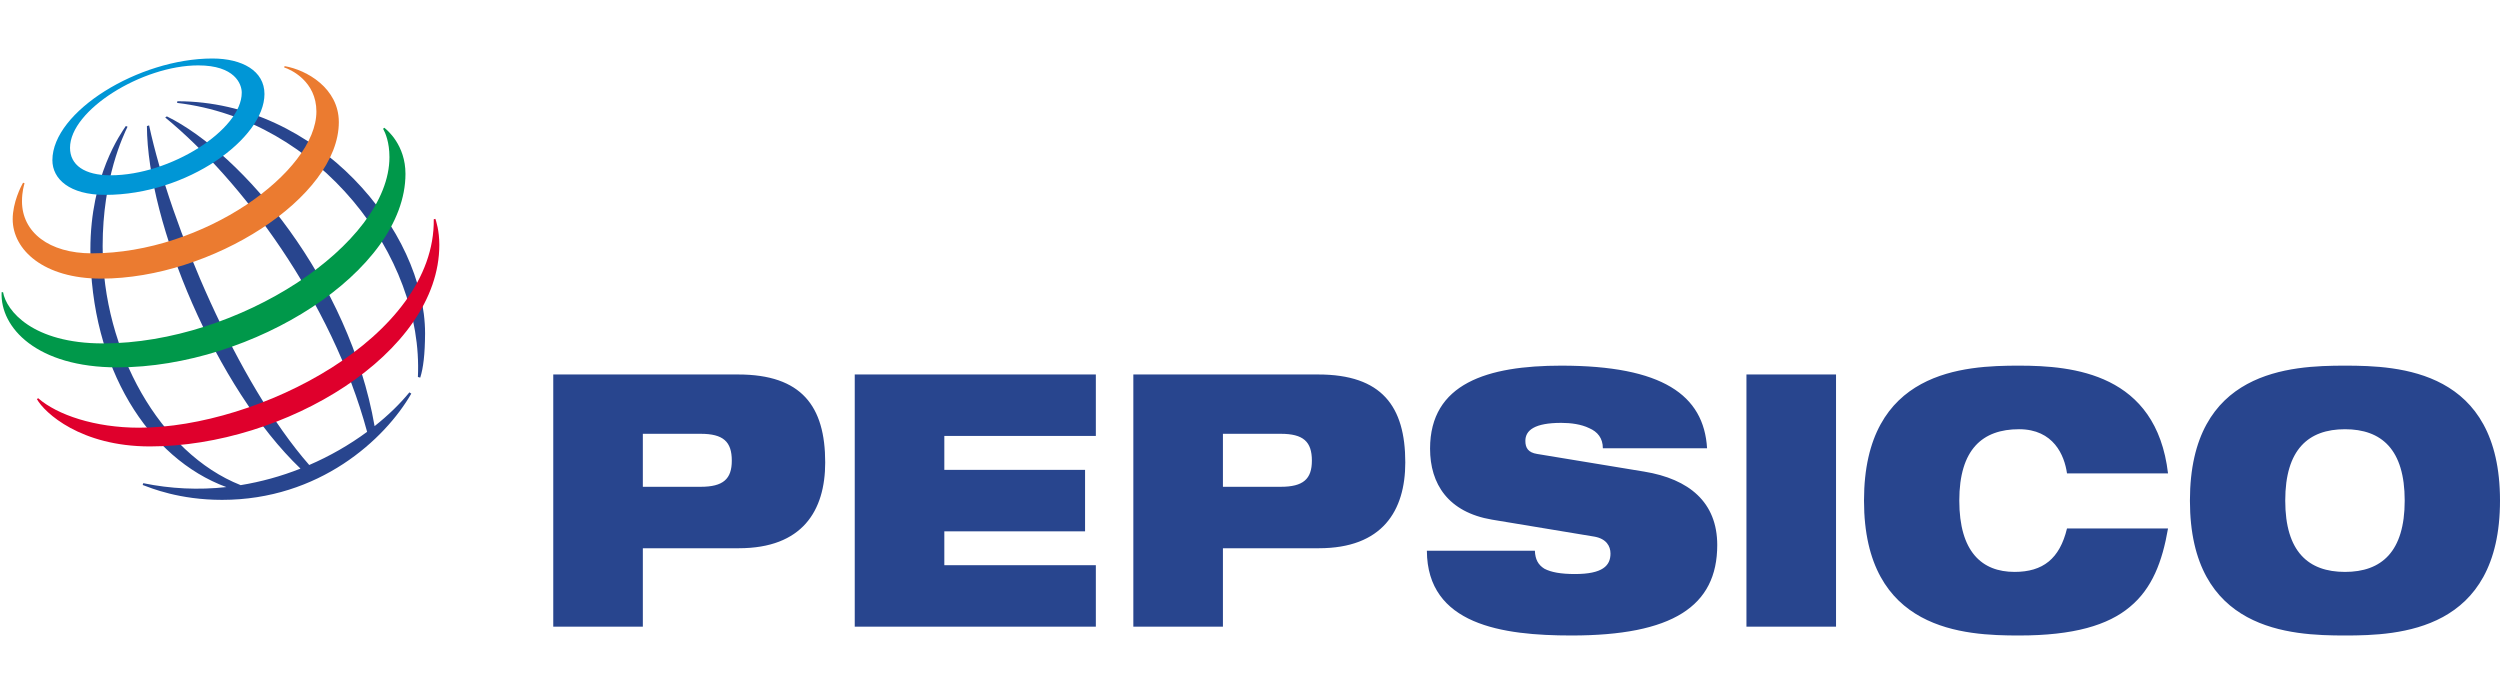 PepsiCo (PEP) increases dividend by 7.1%, marking 51 years of annual increases